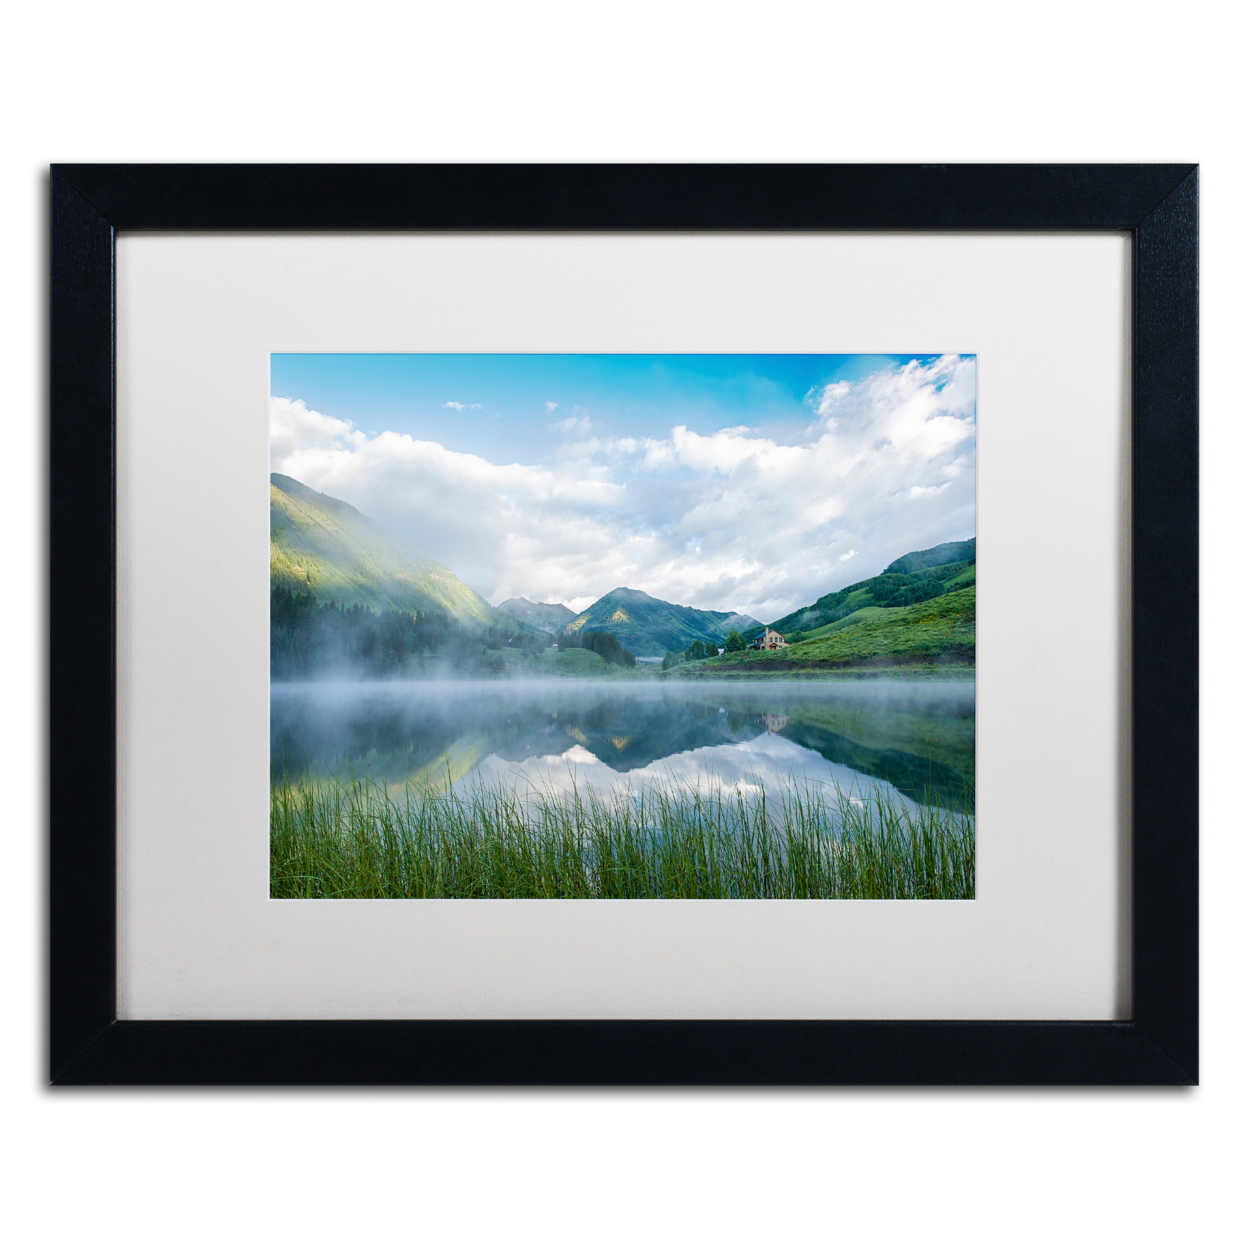 Michael Blanchette Photography 'Fog In The Mirror' Black Wooden Framed Art 18 X 22 Inches